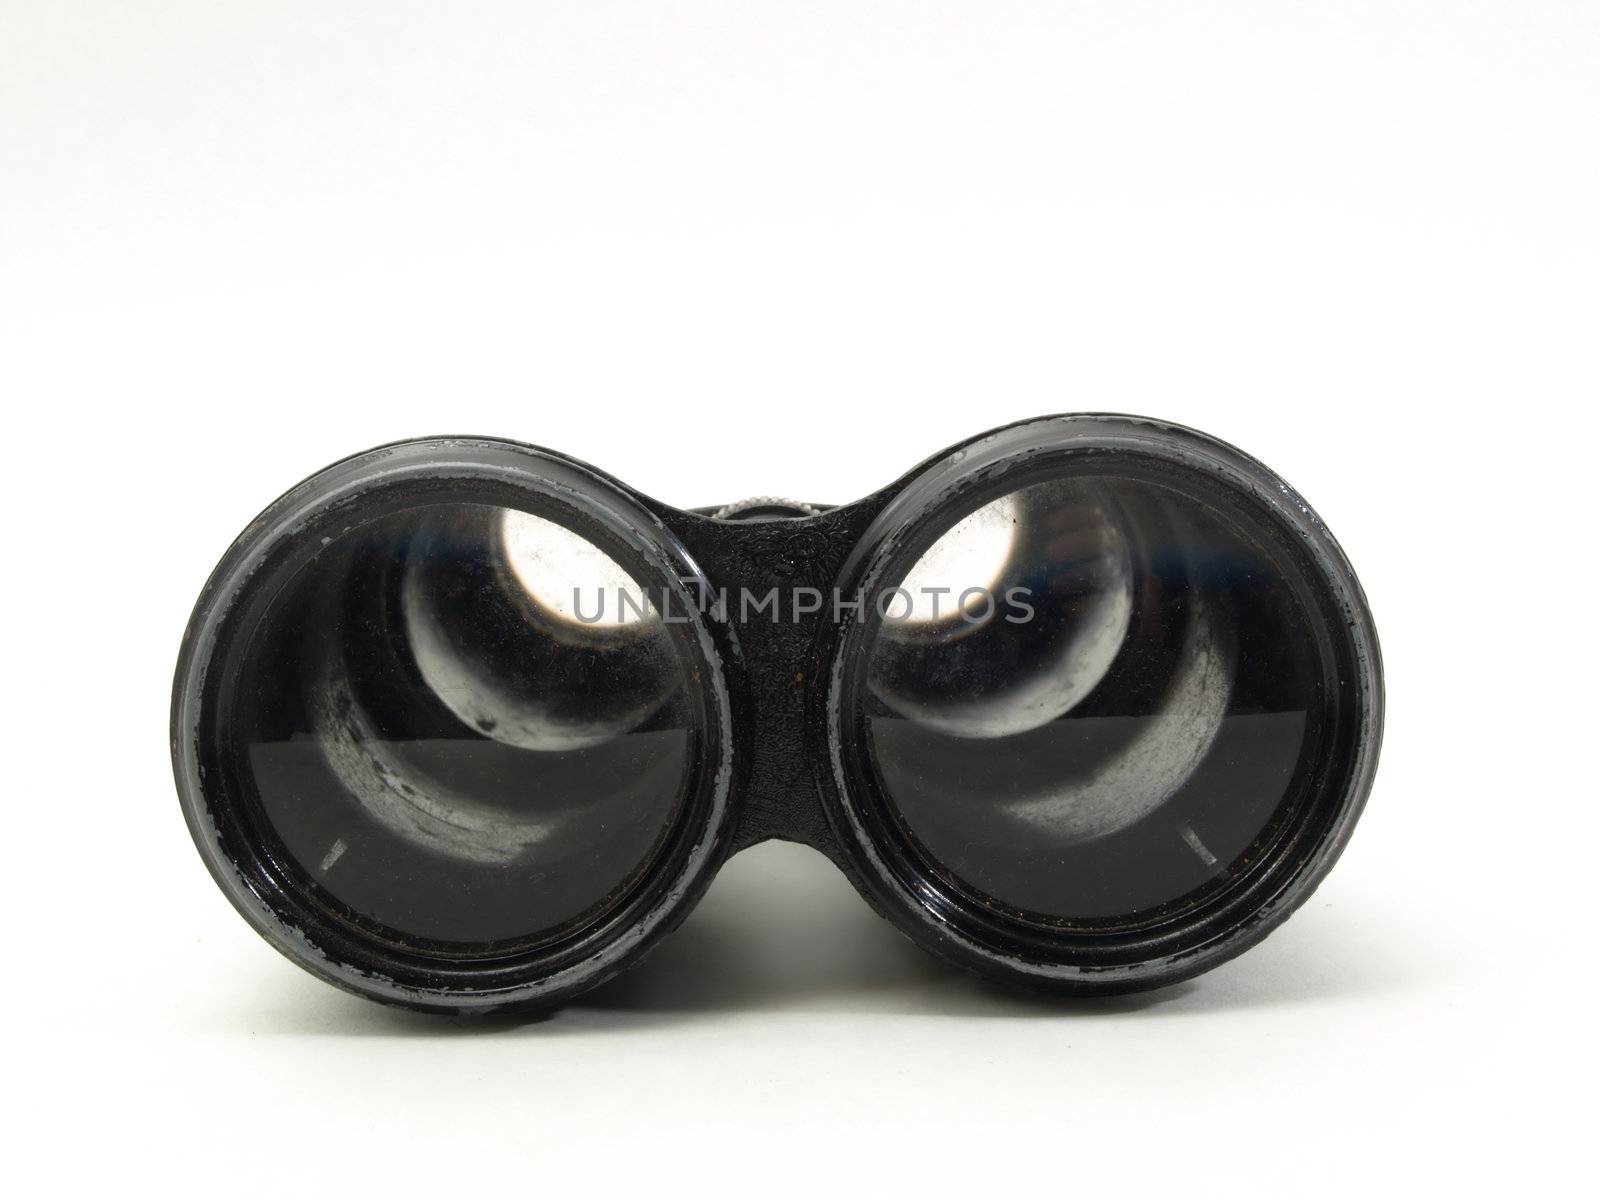 Antique black military issue field binoculars isolated on a white background.